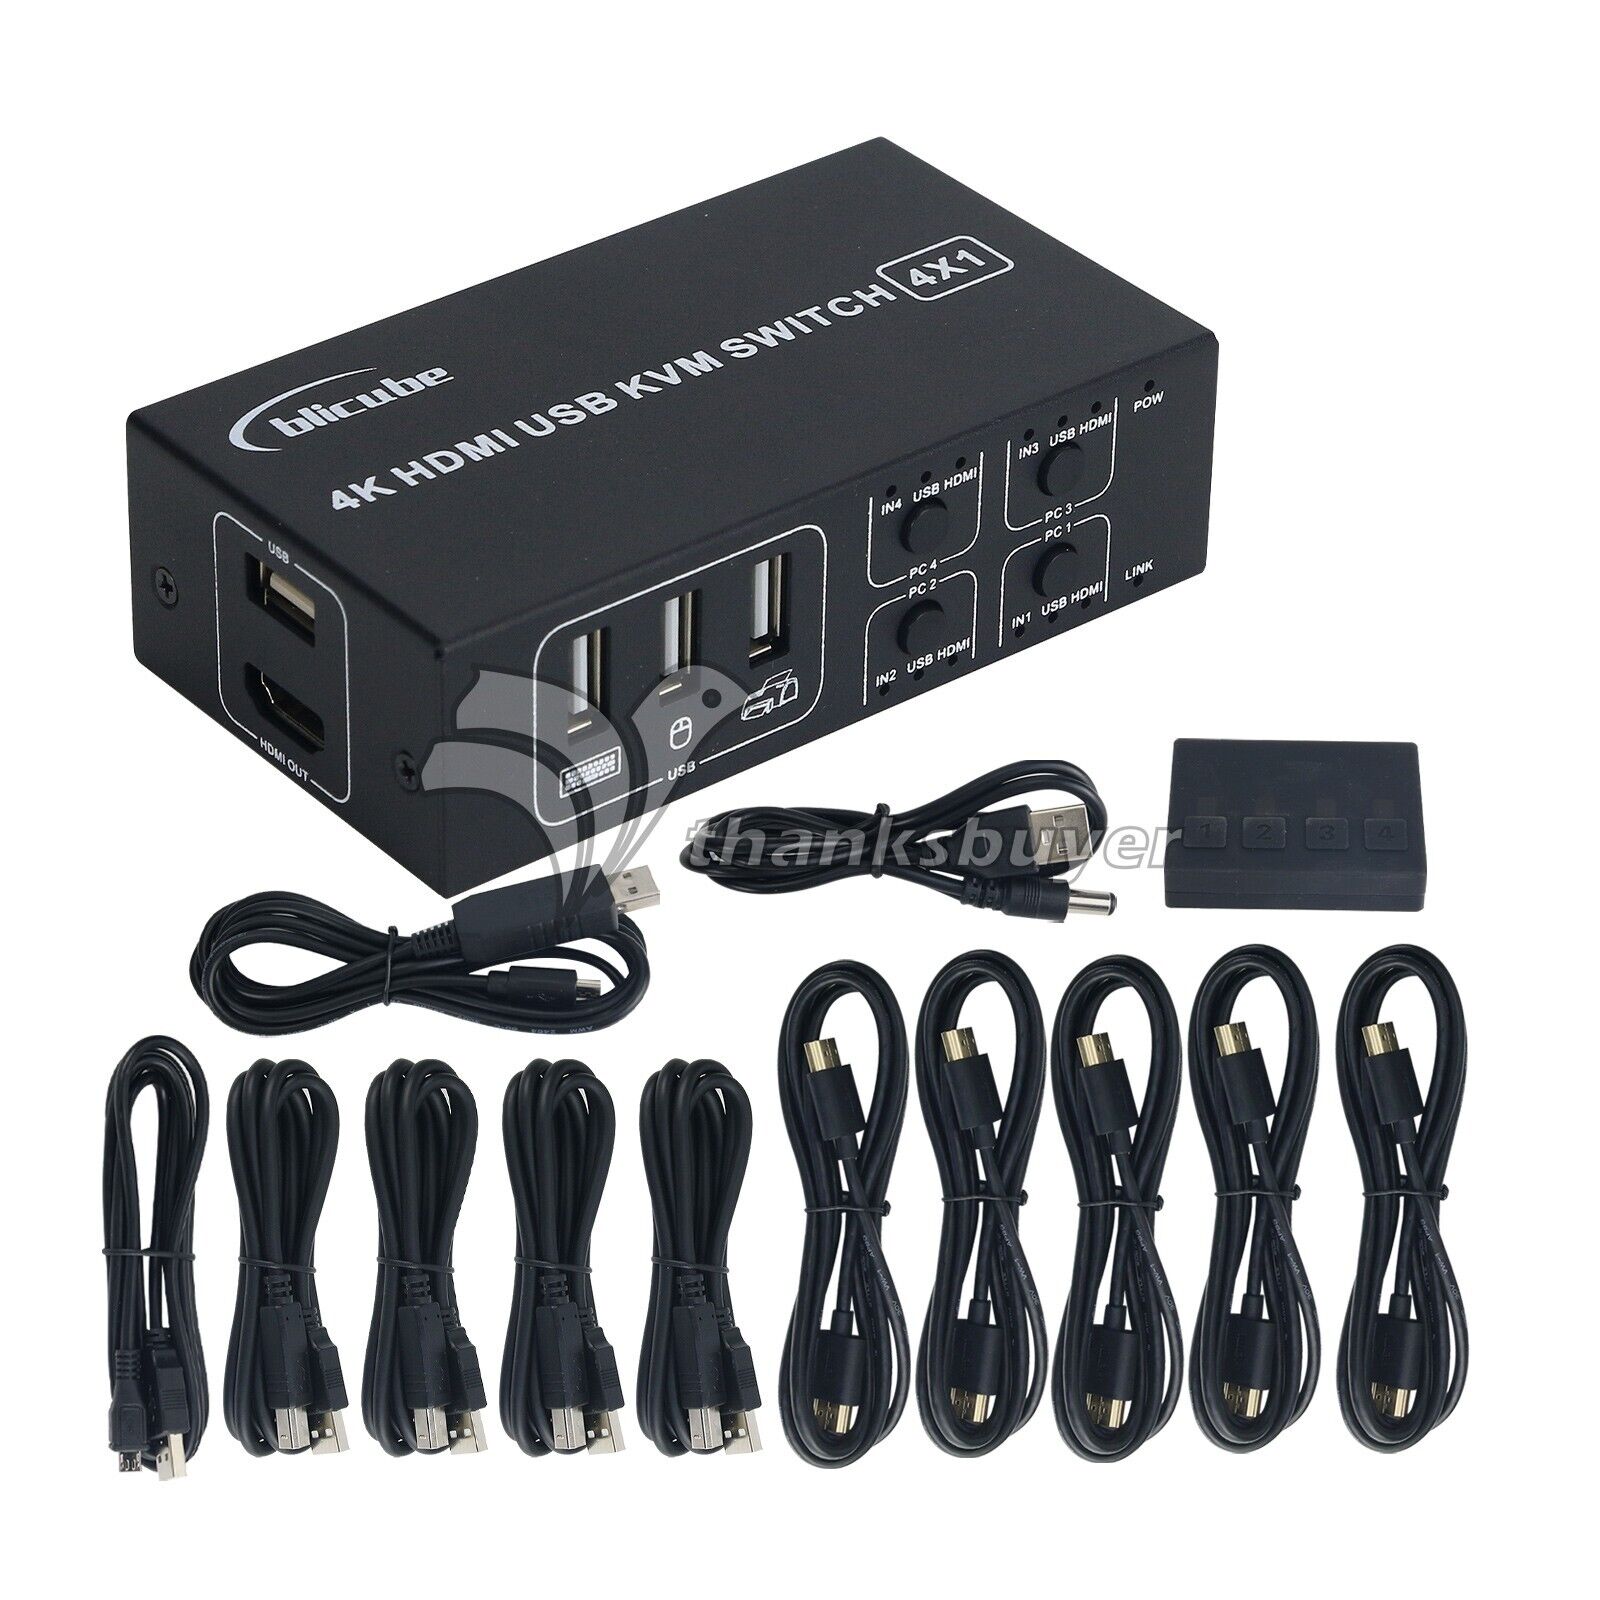 4K HDMI Switch 4 Port Switcher 4 In 1 Out USB KVM Display Support PiKVM/BLIKVM